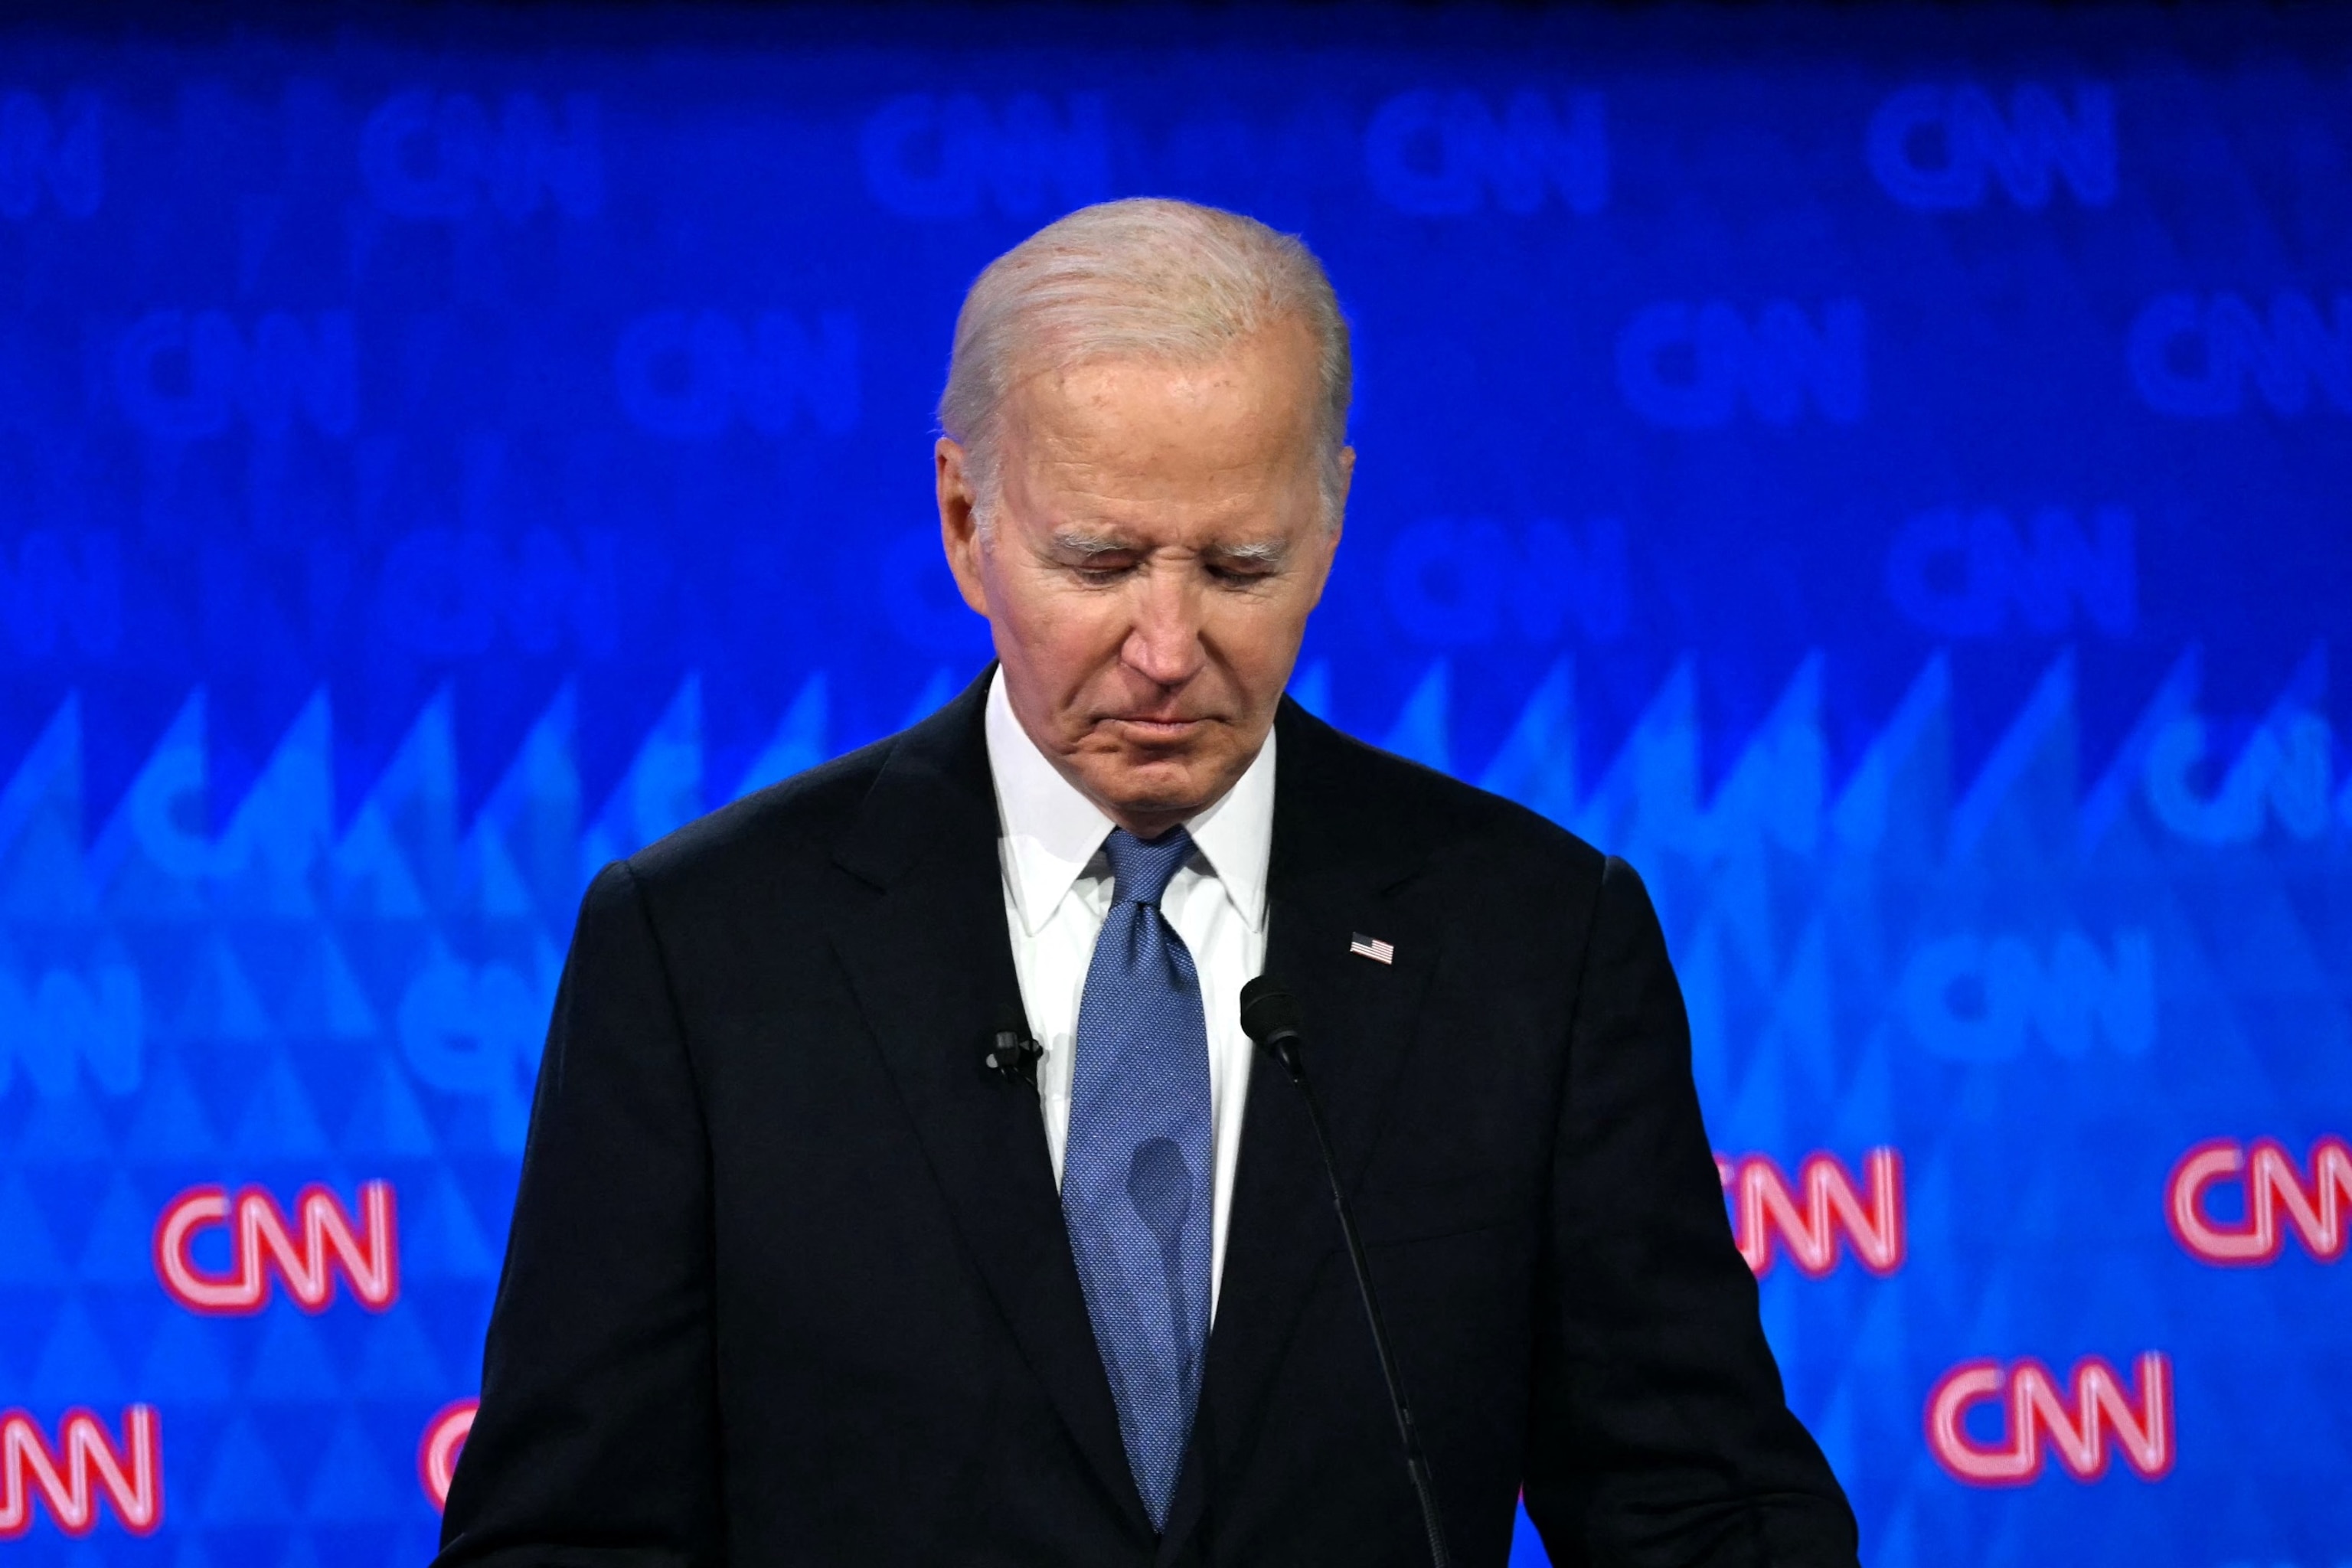 PHOTO: President Joe Biden participates in the first presidential debate of the 2024 elections with former President Donald Trump at CNN's studios in Atlanta, June 27, 2024.